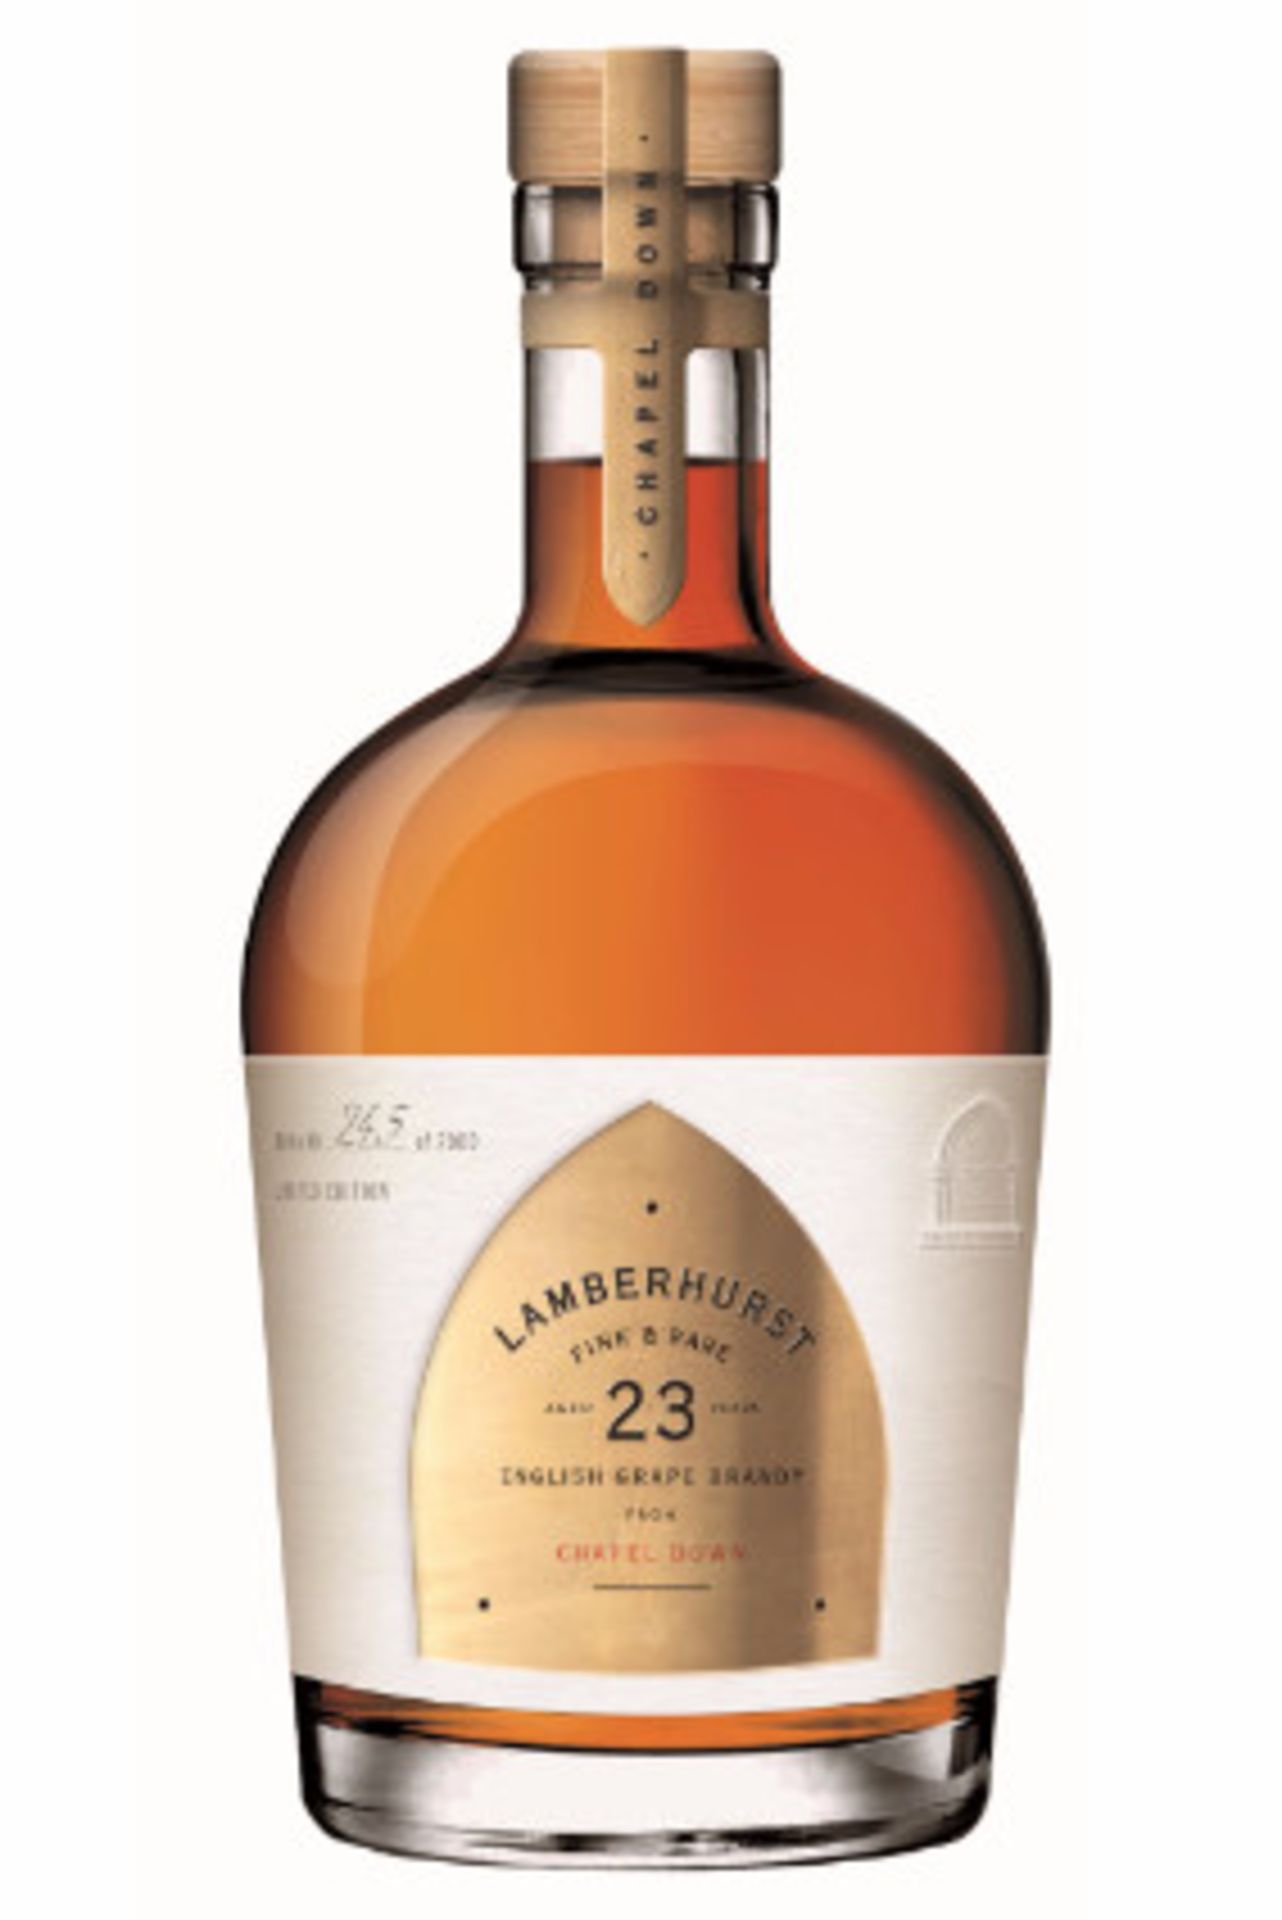 Lamberhurst 23 Year Old Fine &Amp; Rare 70cl Chapel Down ( Bid Is For 1x Bottle Option To Purchase